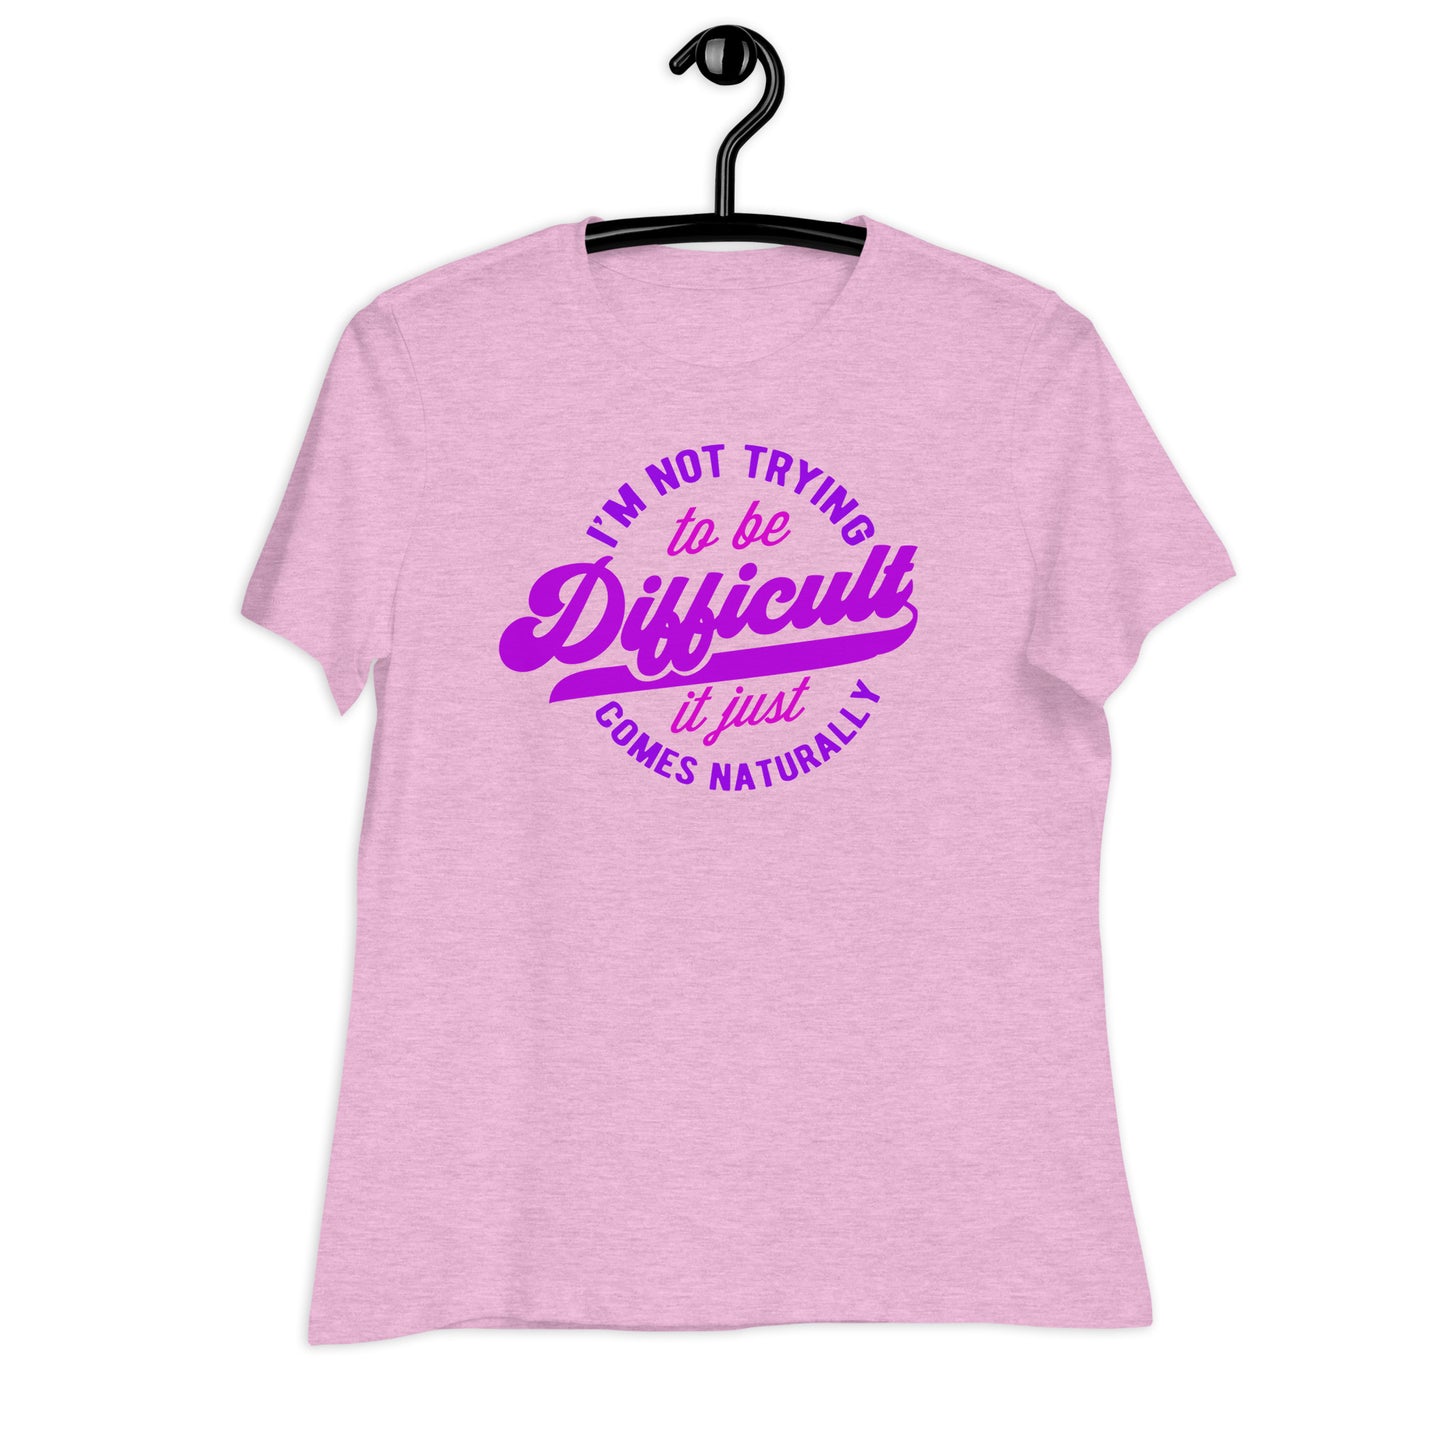 I'm Not Trying to be Difficult It Just Comes Naturally Bella Canvas Relaxed Women's T-Shirt